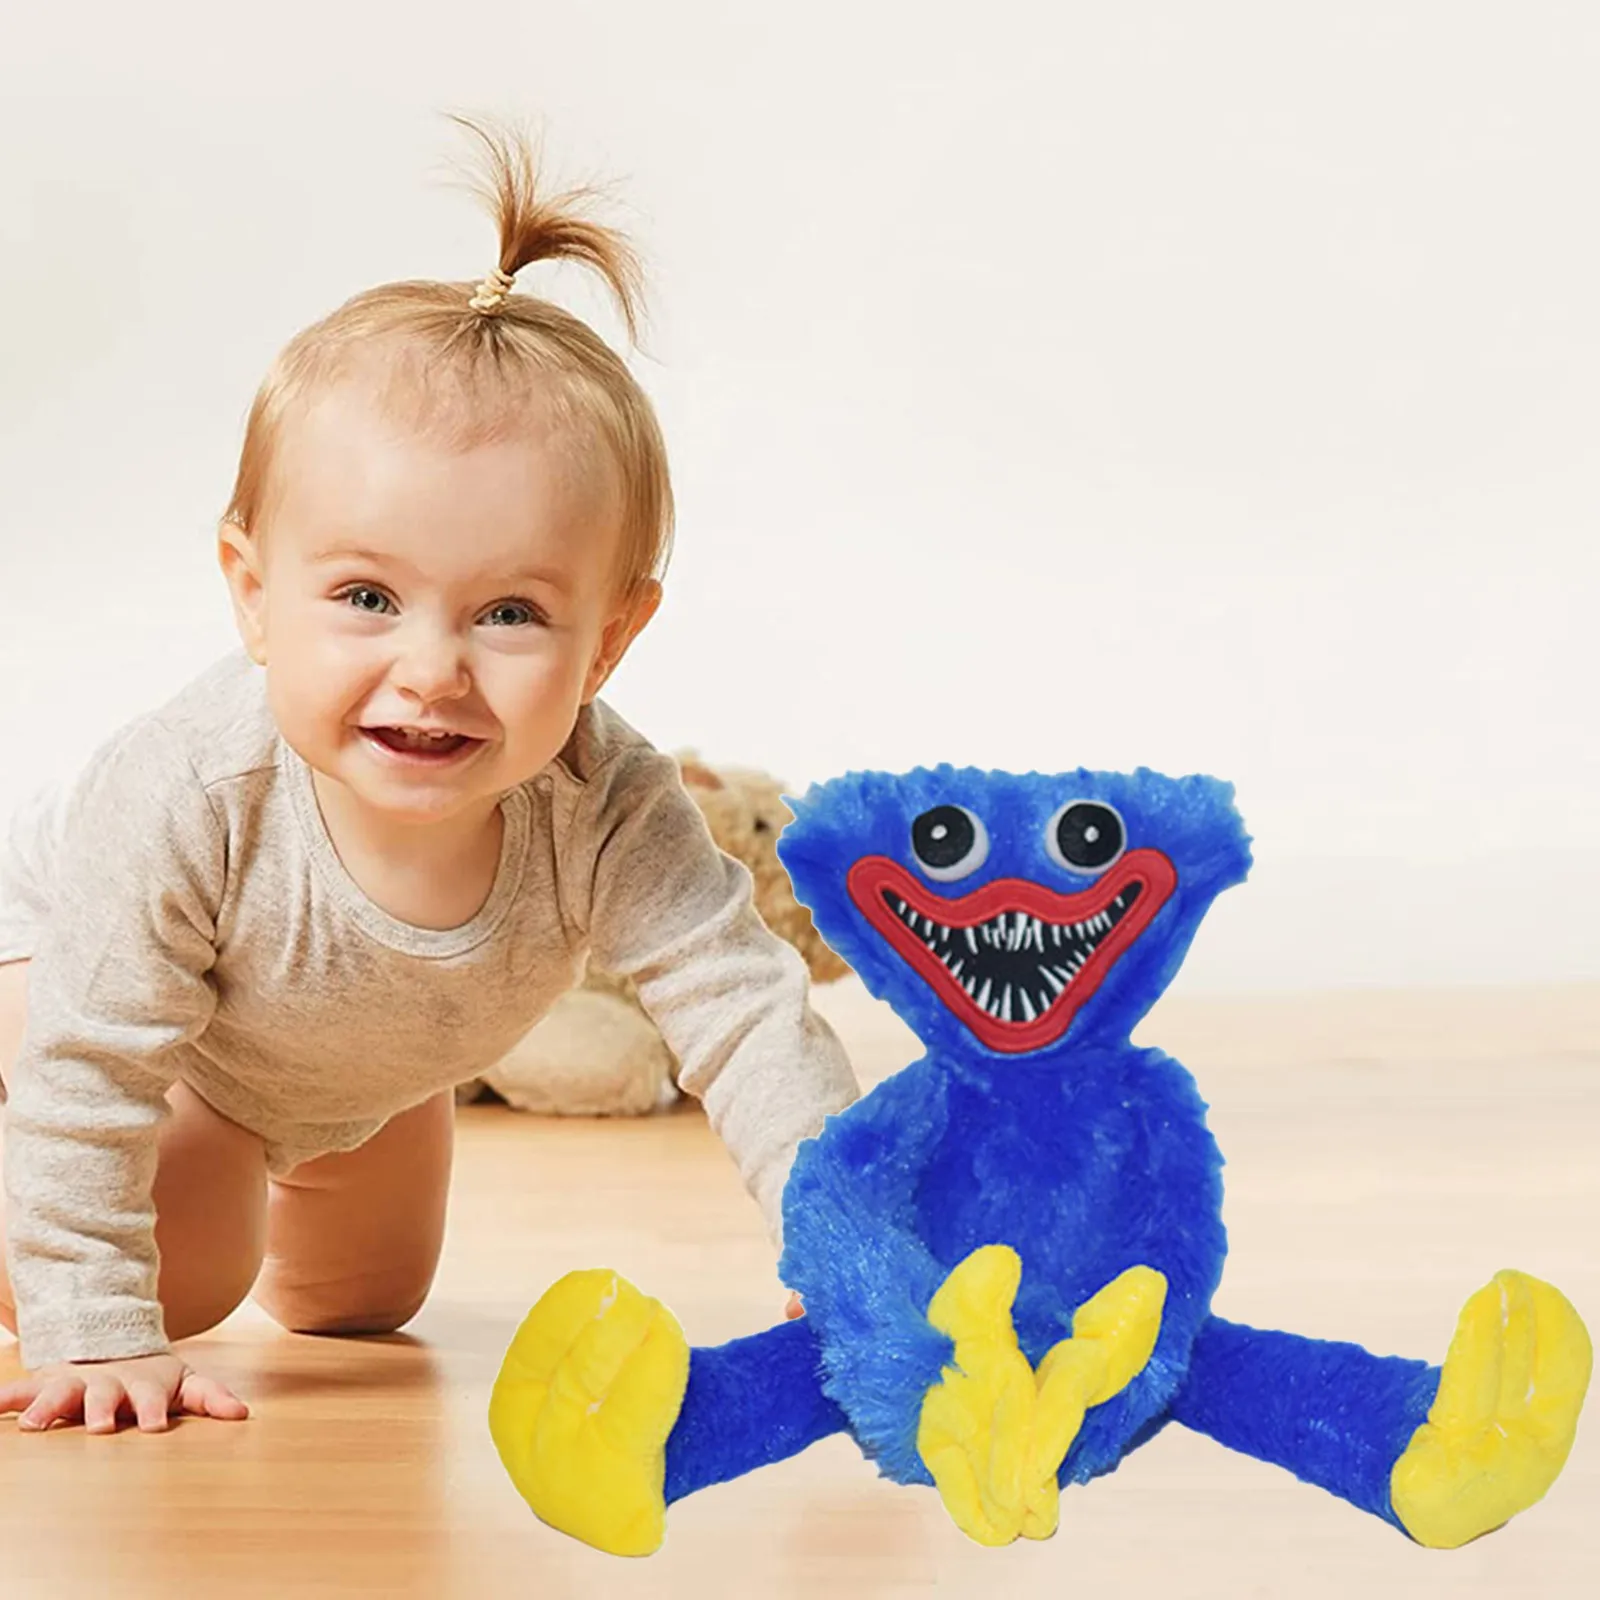 Huggy Wuggy Plush Toy Poppy Playtime Hot Sell at 50% Off Fast Shipping